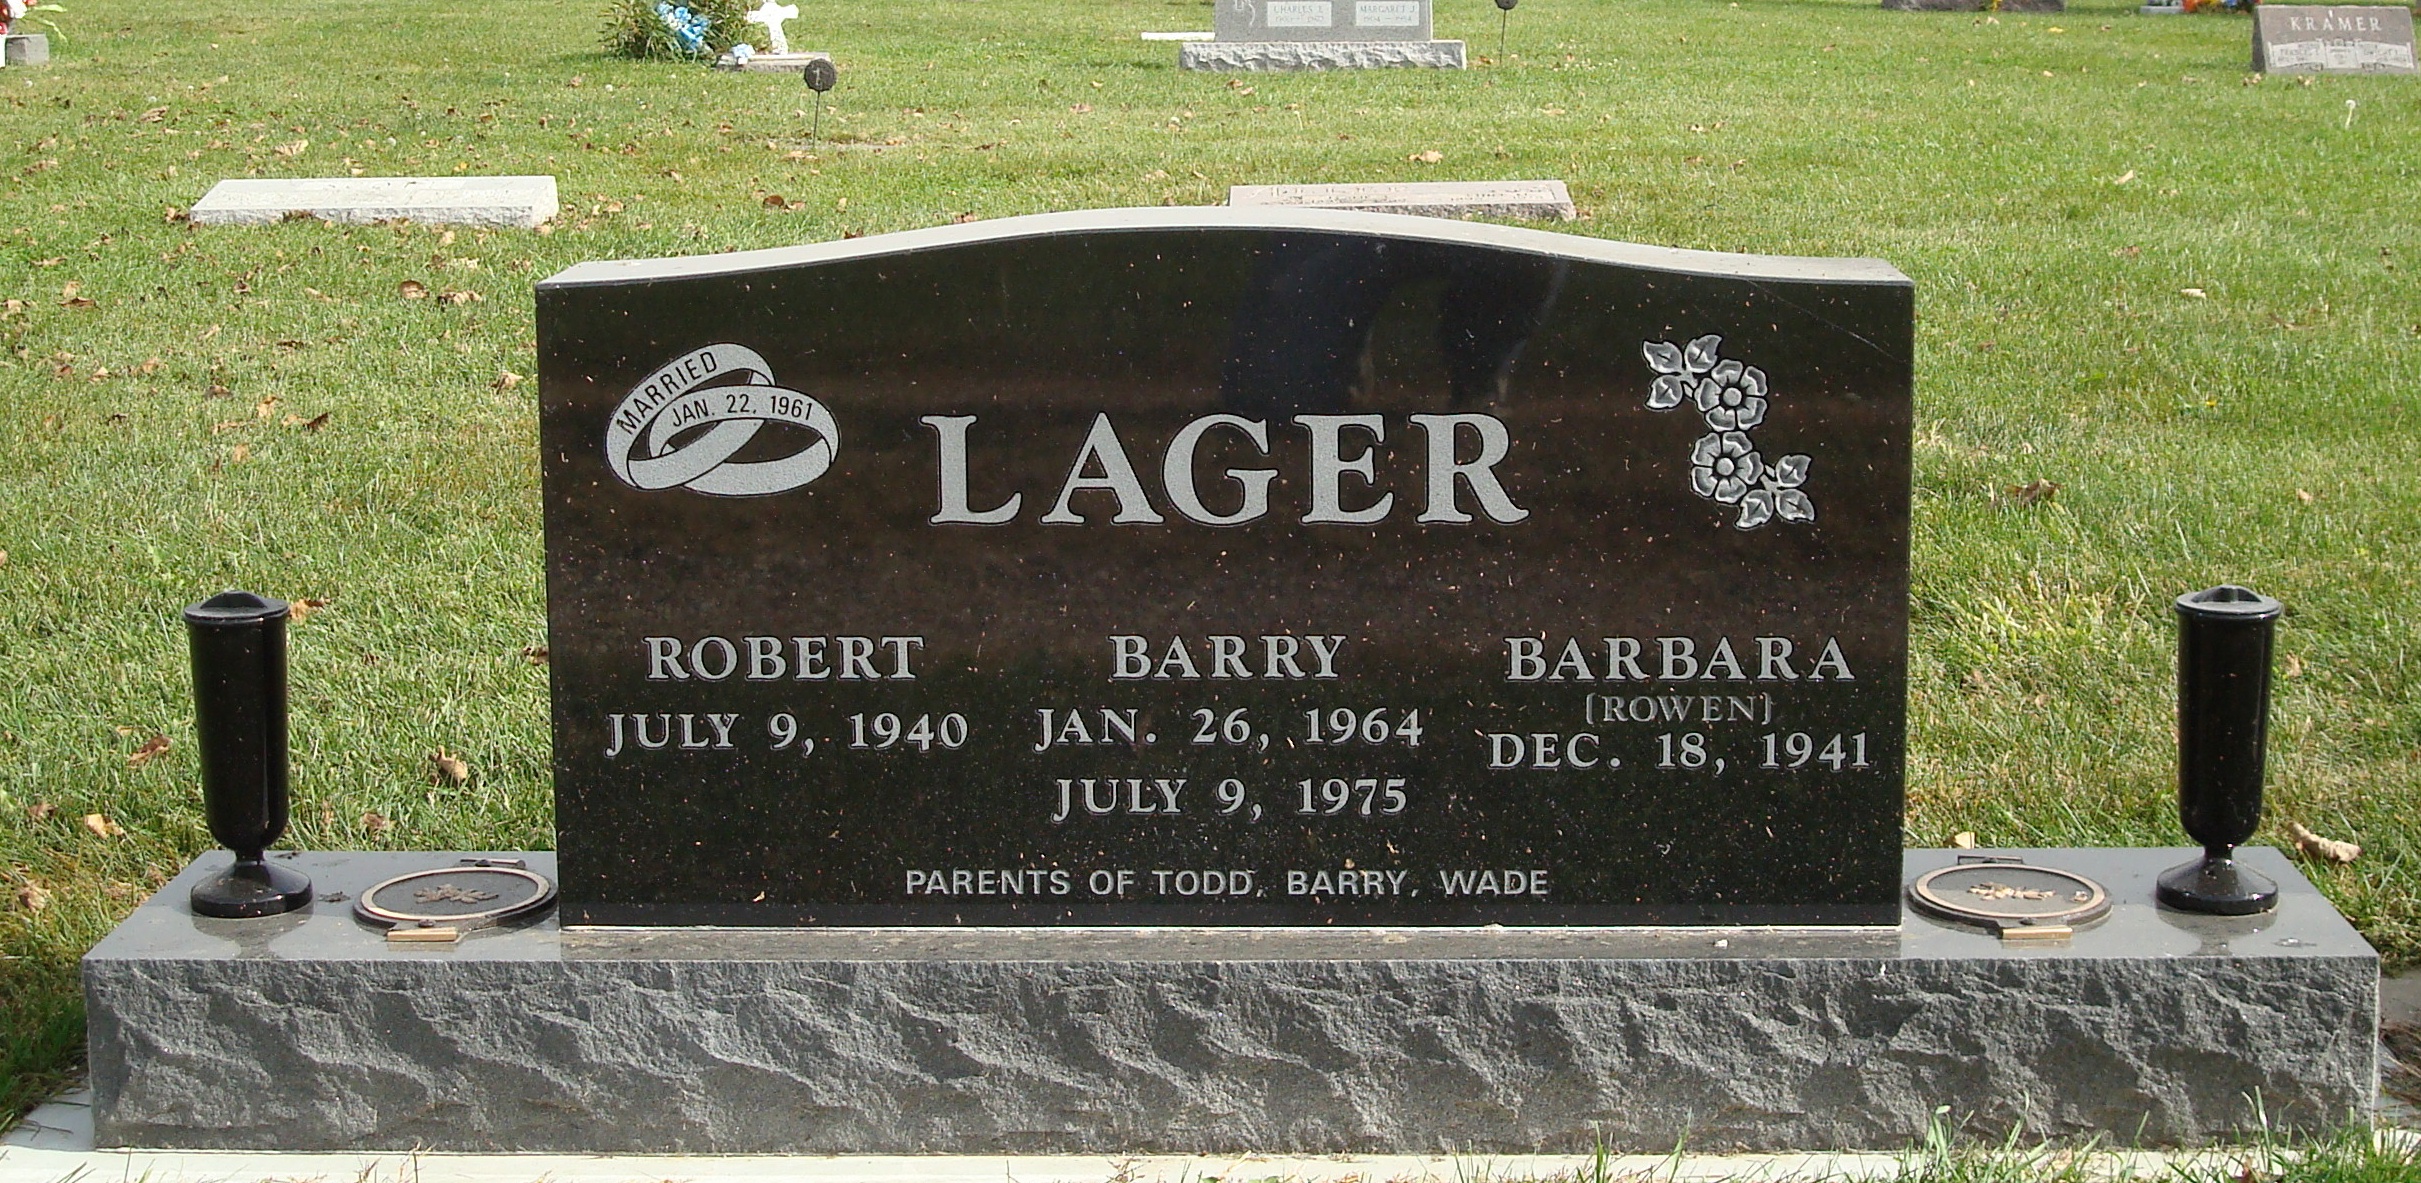 Lager Cremation Memorial